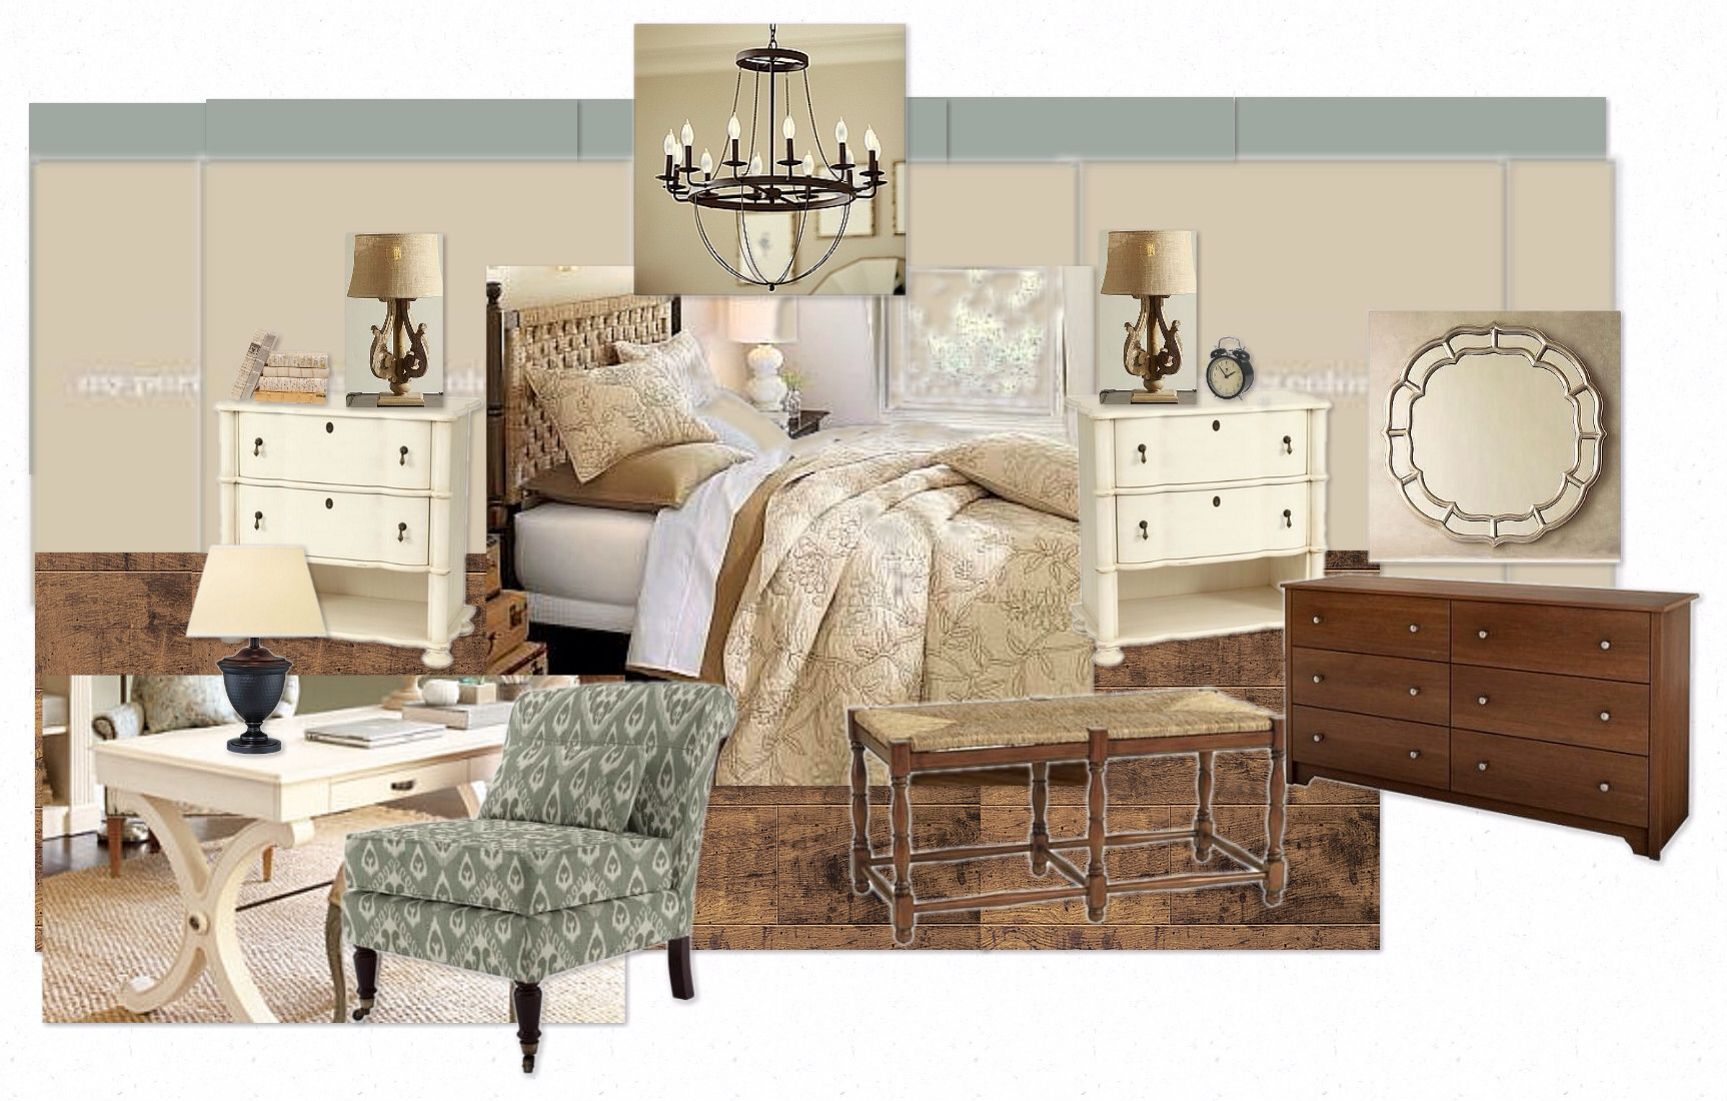 mix and match furniture in bedroom